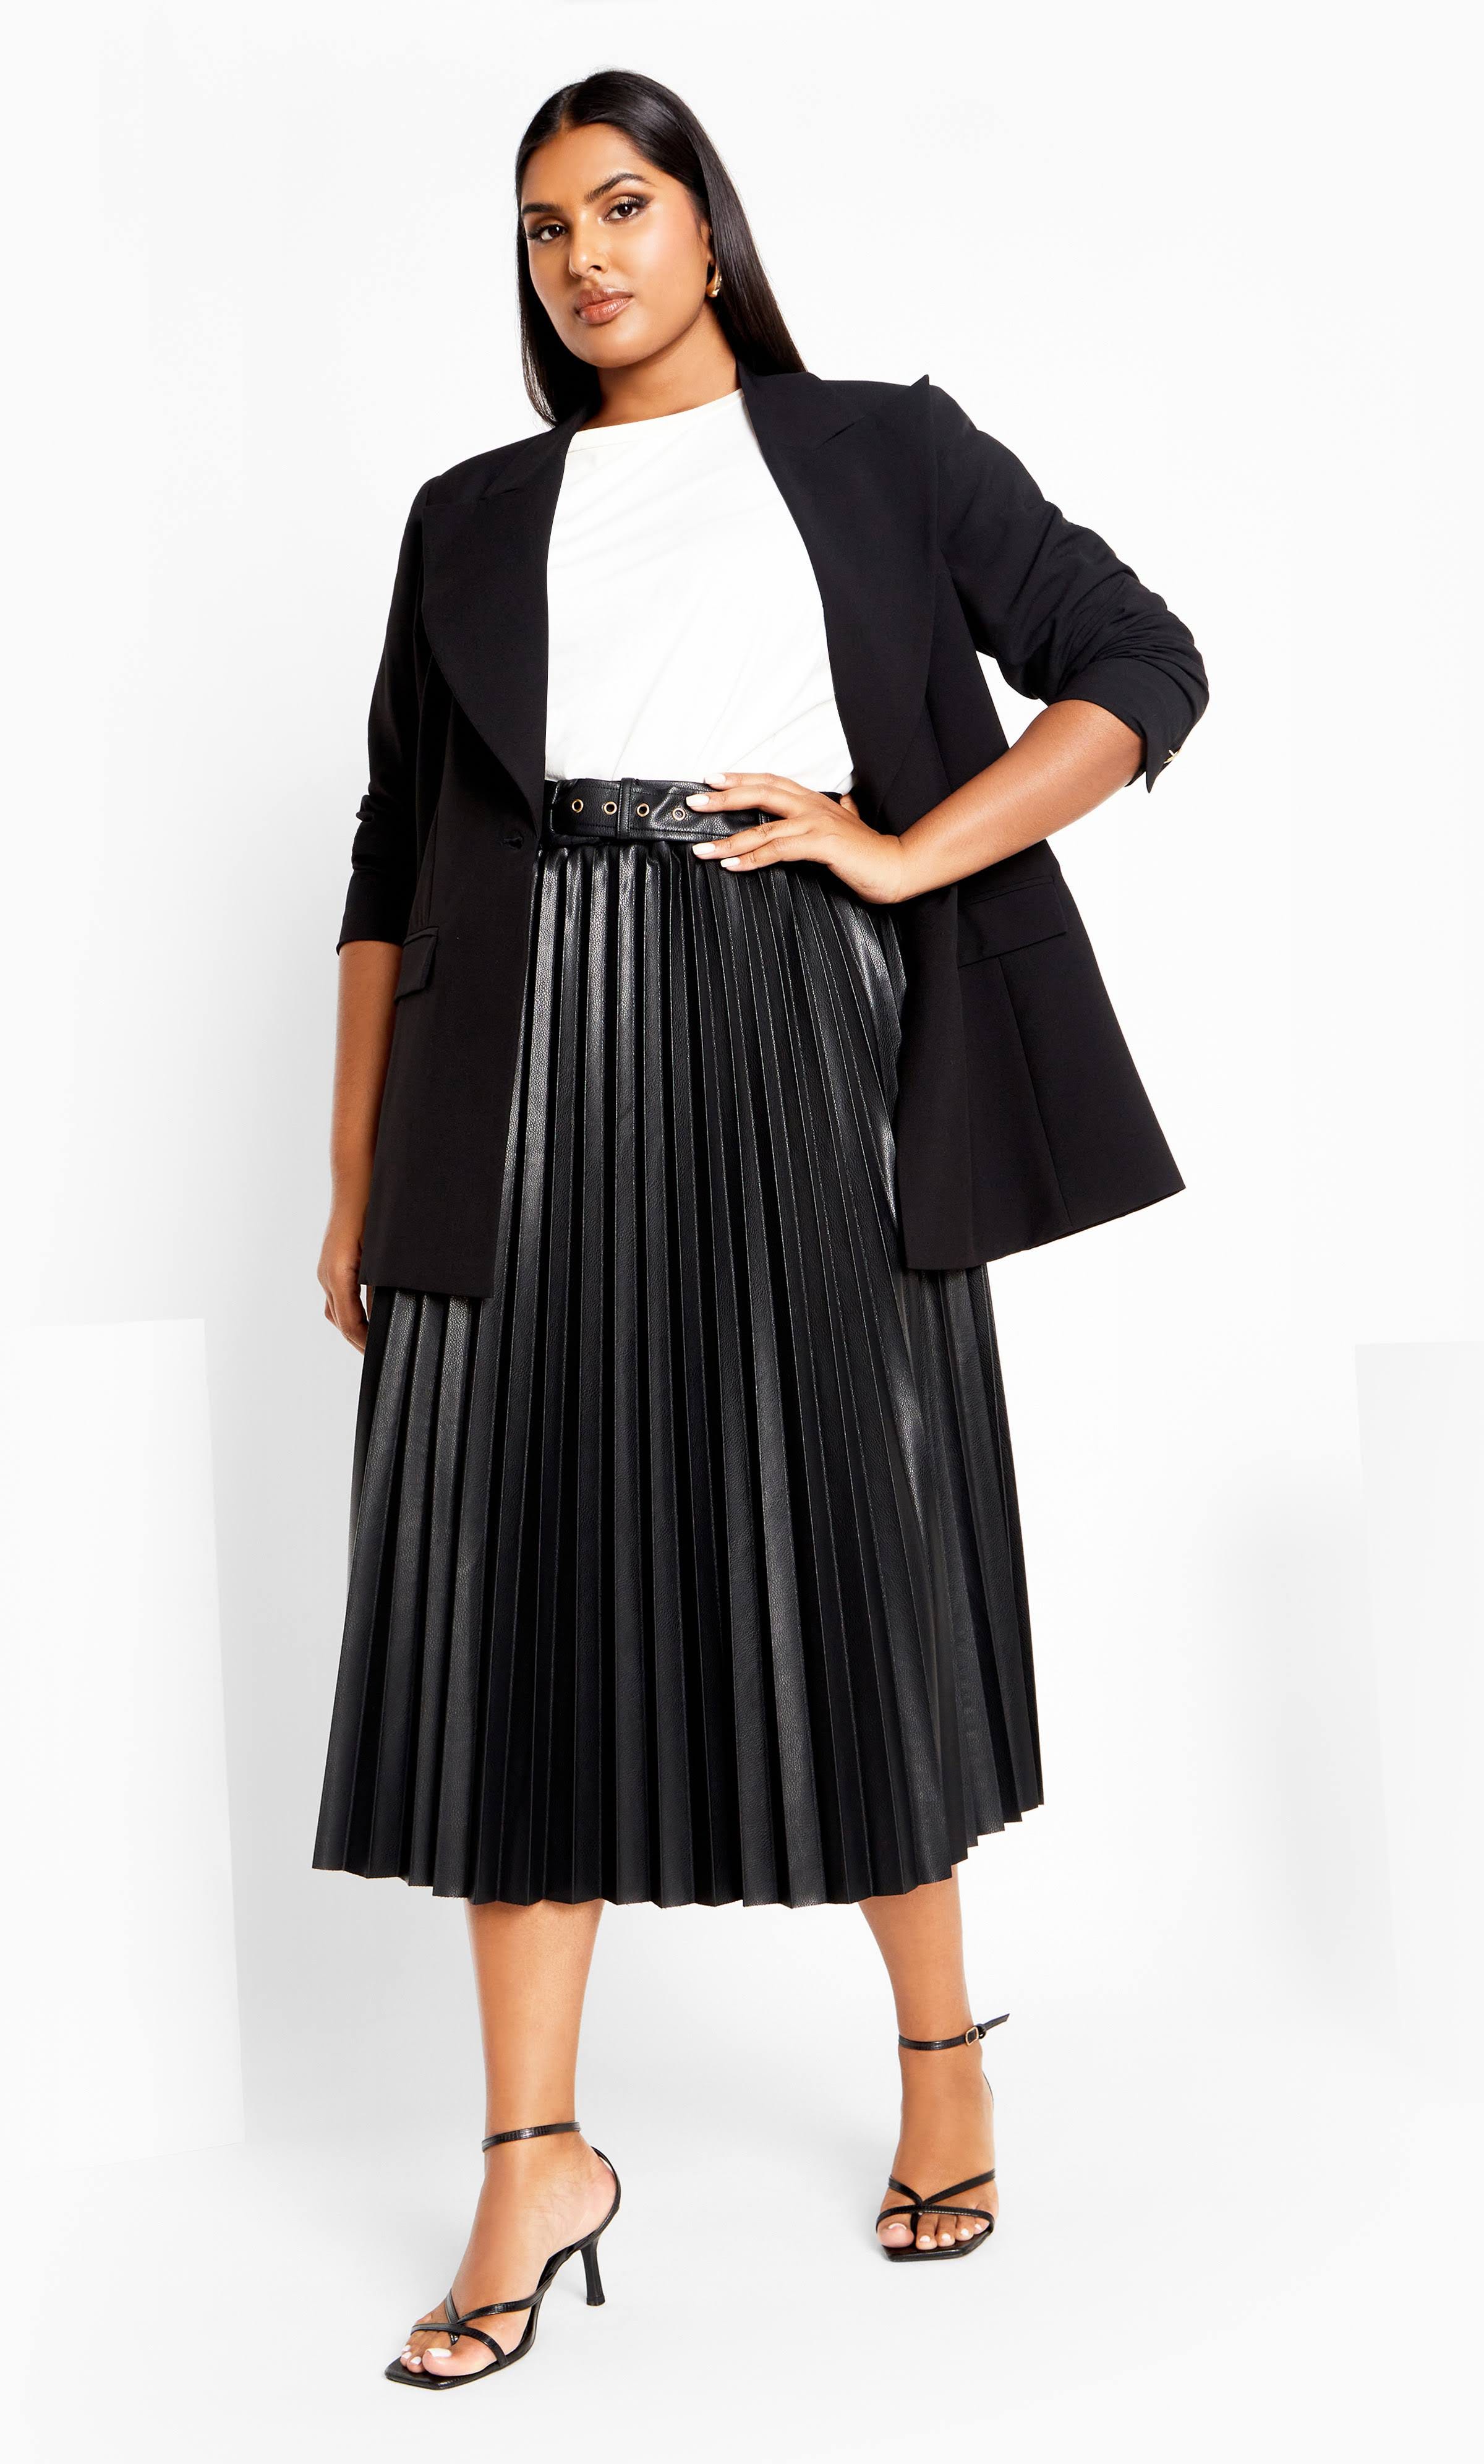 City Chic's Black 14W Plus Size Leather Skirt: Fashionable and Comfortable | Image